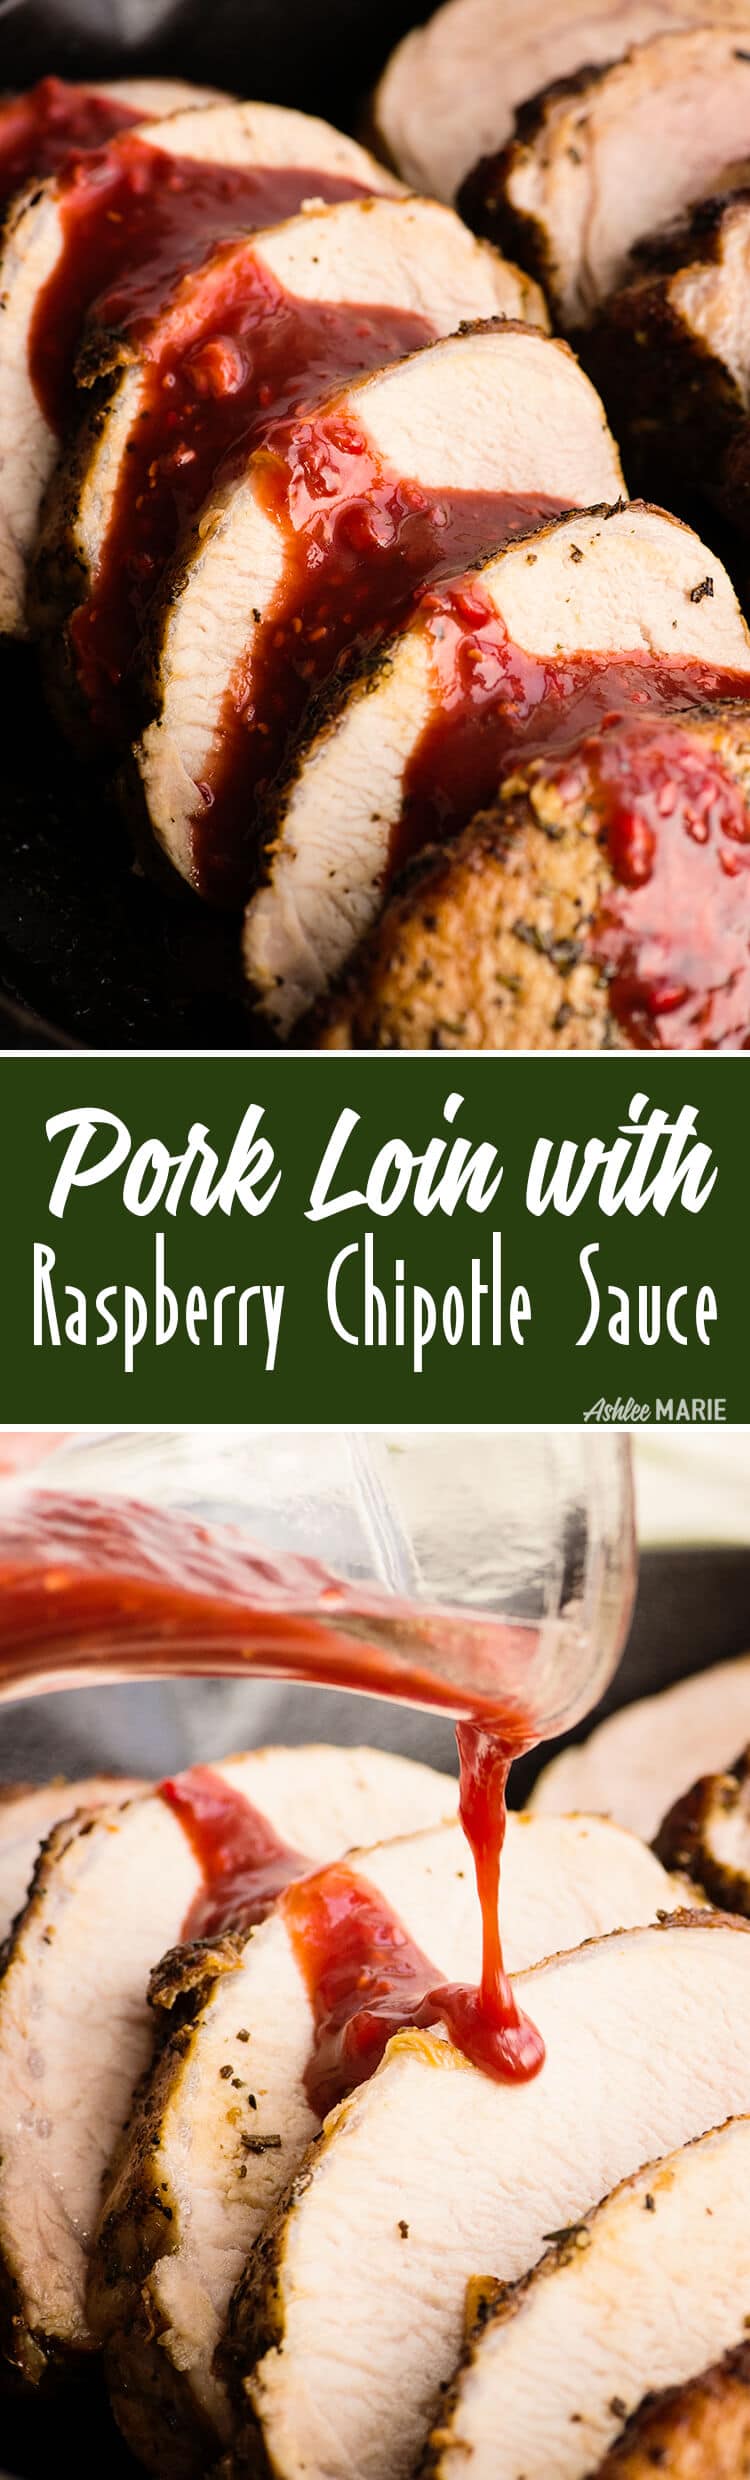 a delicious pork loin perfectly cooked with an easy homemade raspberry chipotle sauce